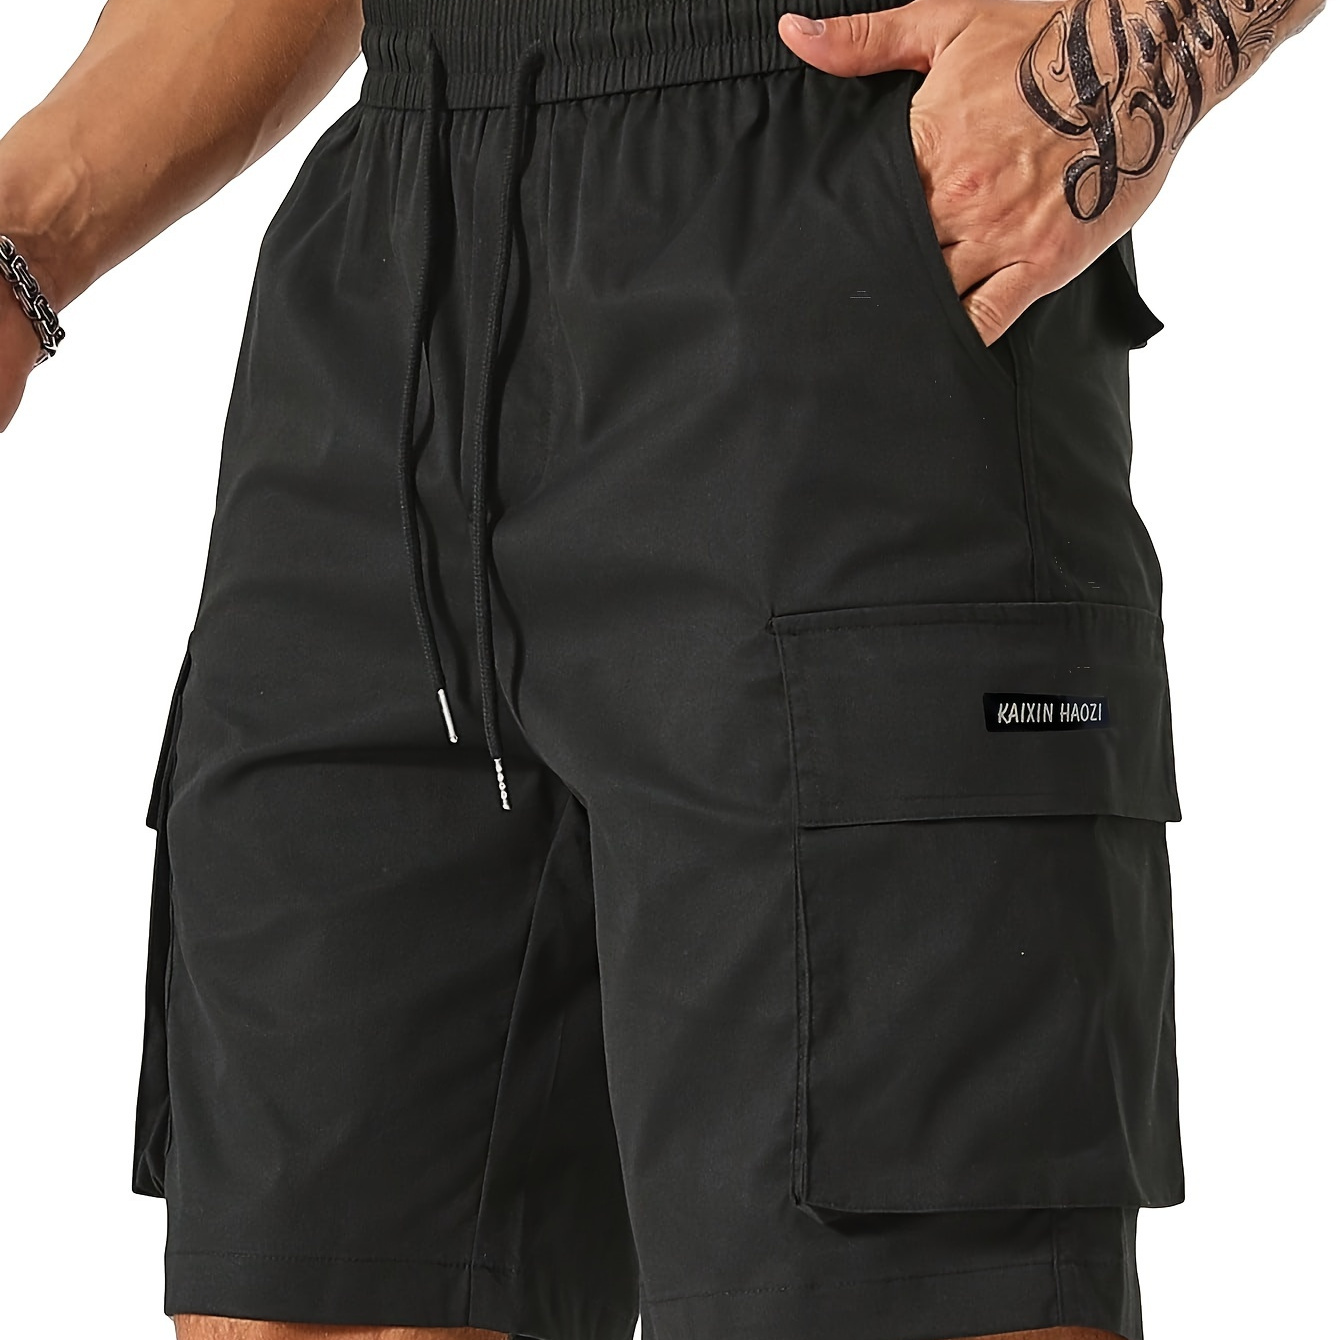 

Men's Solid Cargo Shorts With Flap Pockets And Drawstring, Versatile And Chic Shorts For Summer